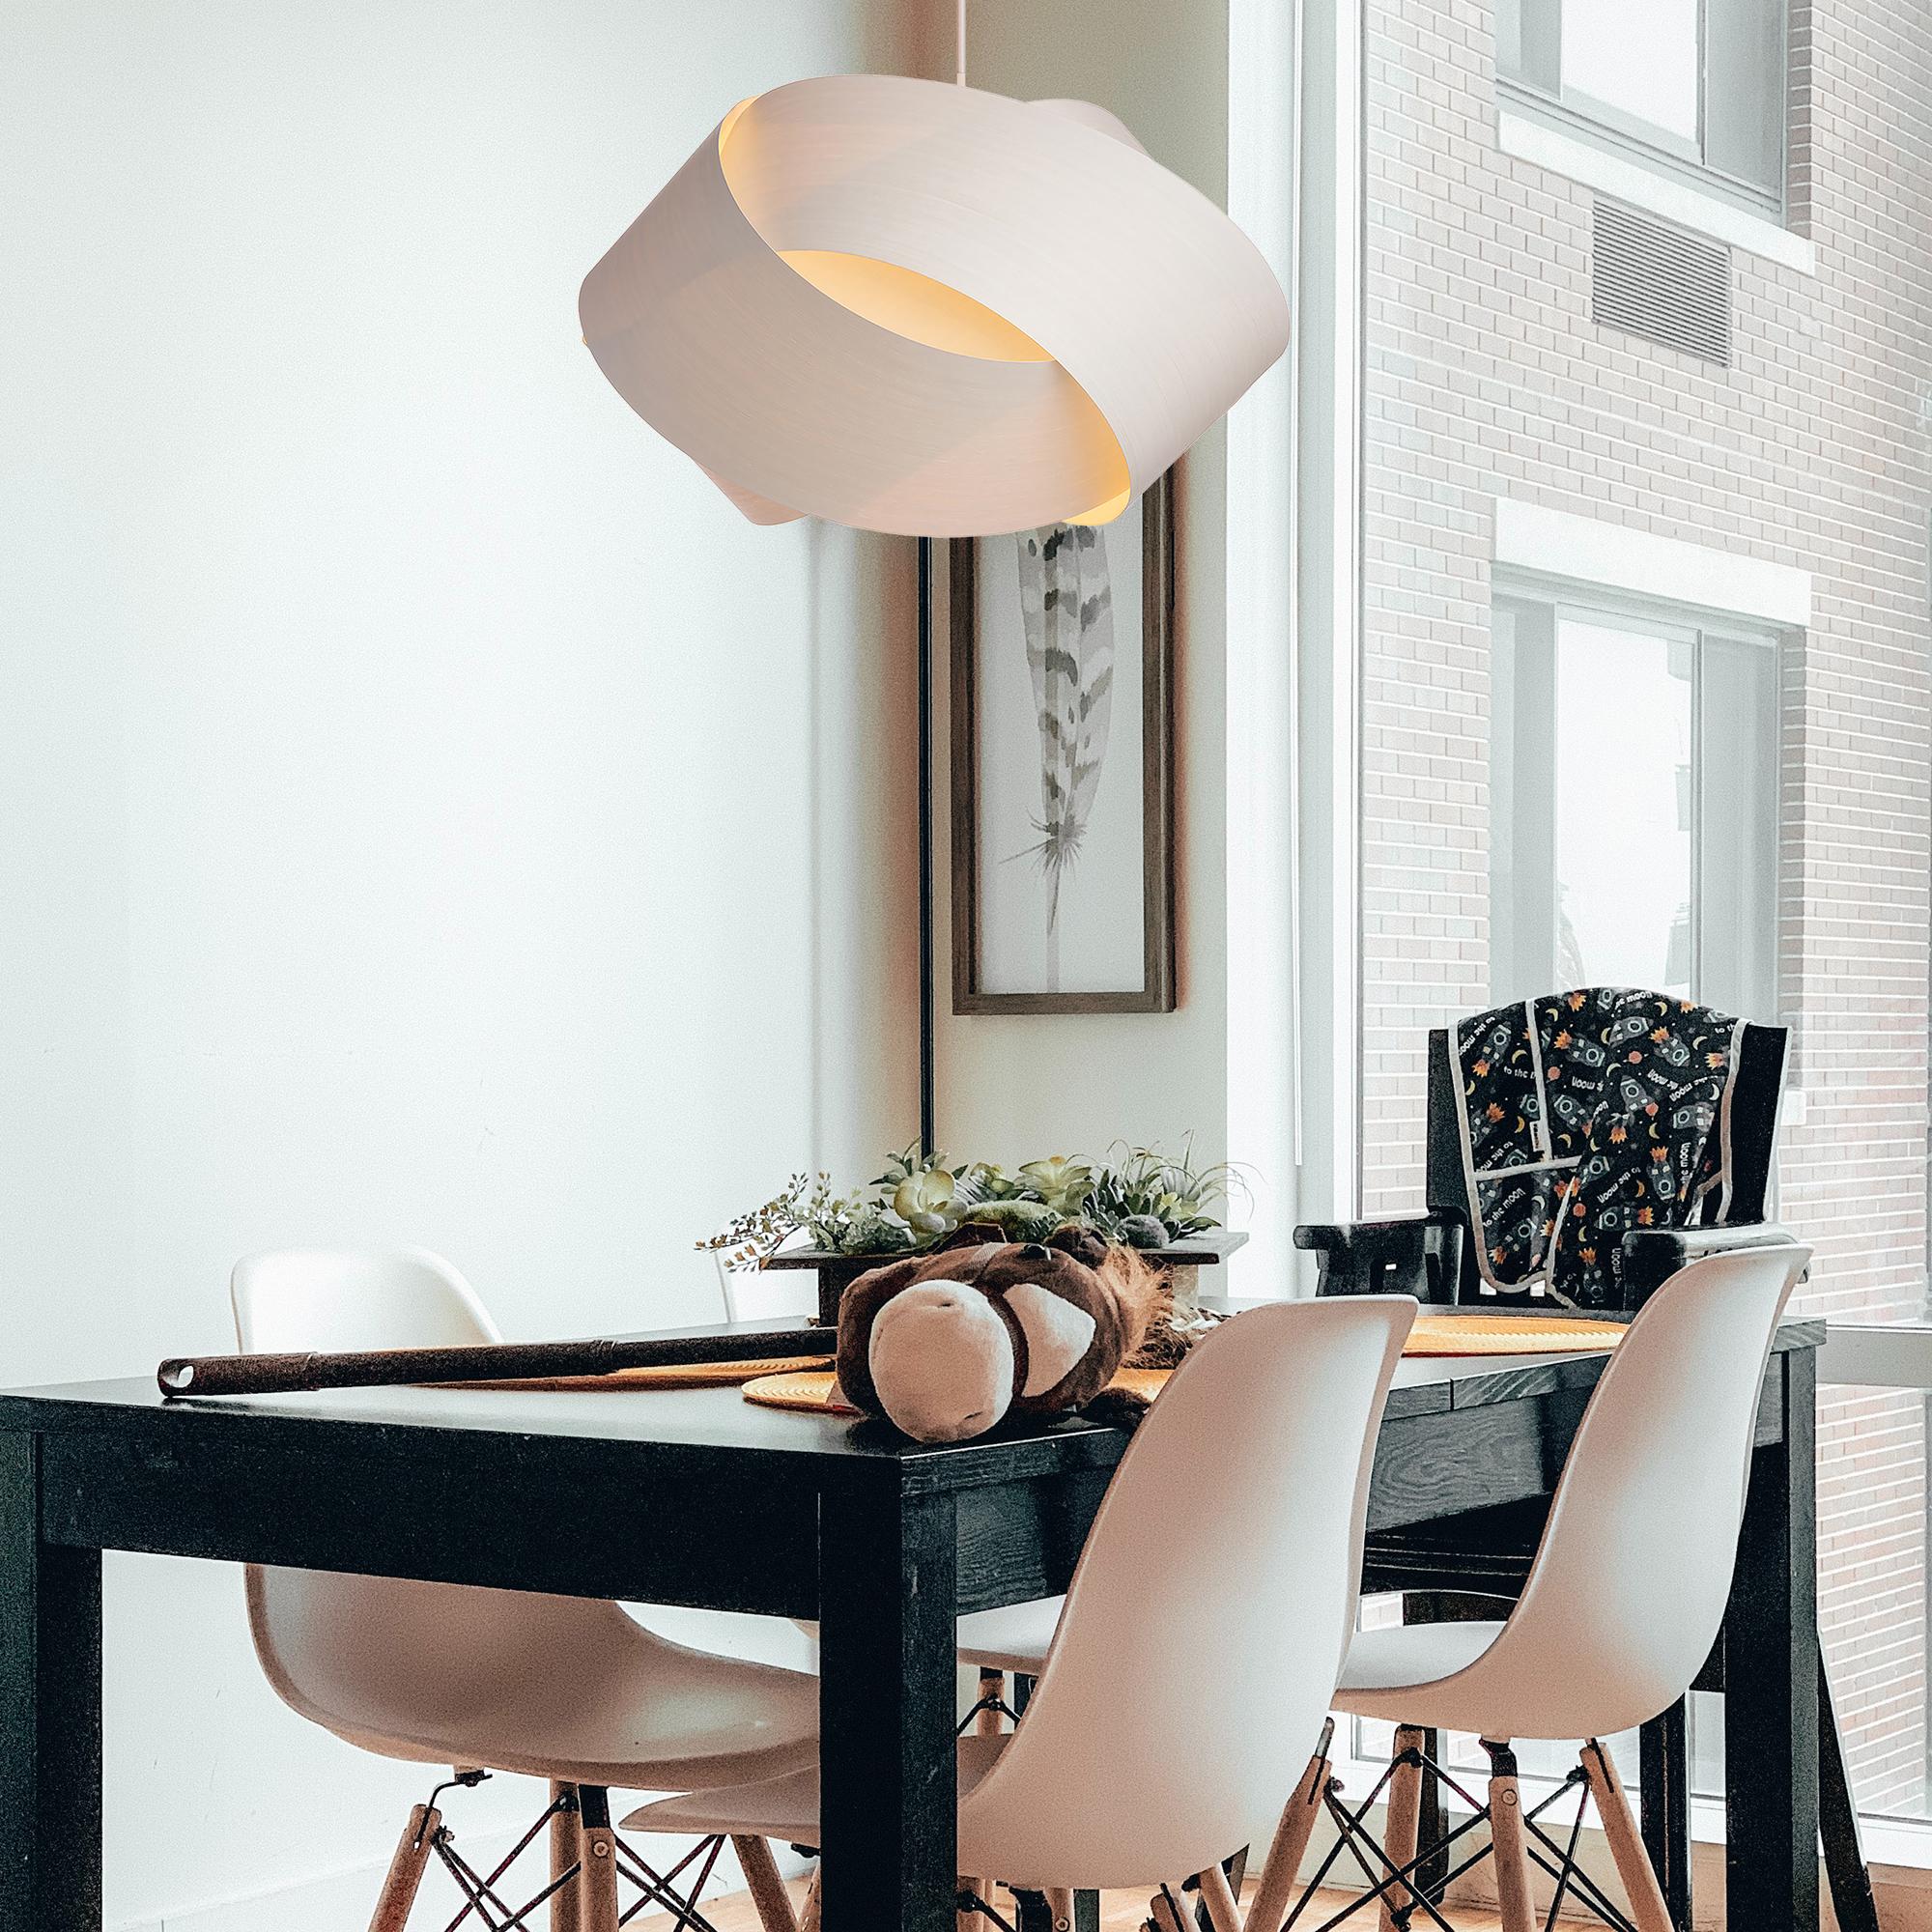 The Serene pendant light is a contemporary, Mid-Century Modern light fixture with a Scandinavian design and organic modern composition. This minimalist luxury wood veneer pendant design is the perfect way to add a touch of nature and elegance to